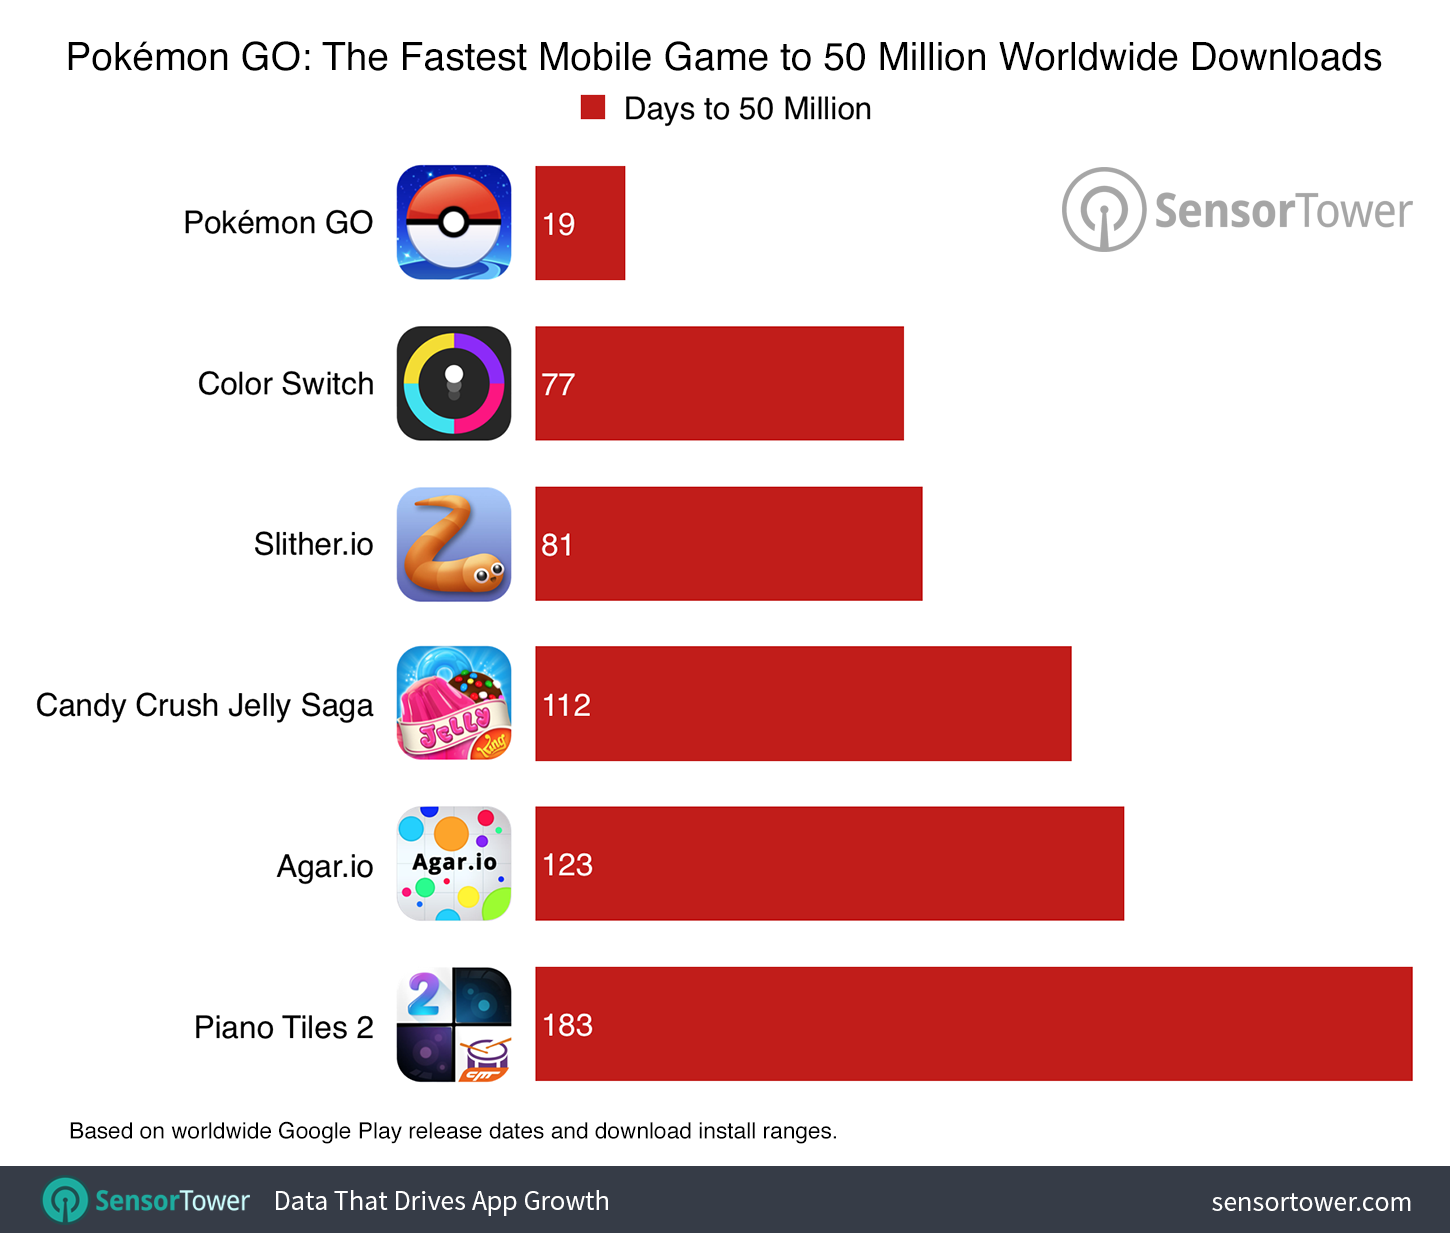 Pokémon GO Hit 50 Million Downloads in Record Time, Now at More Than 75 ...